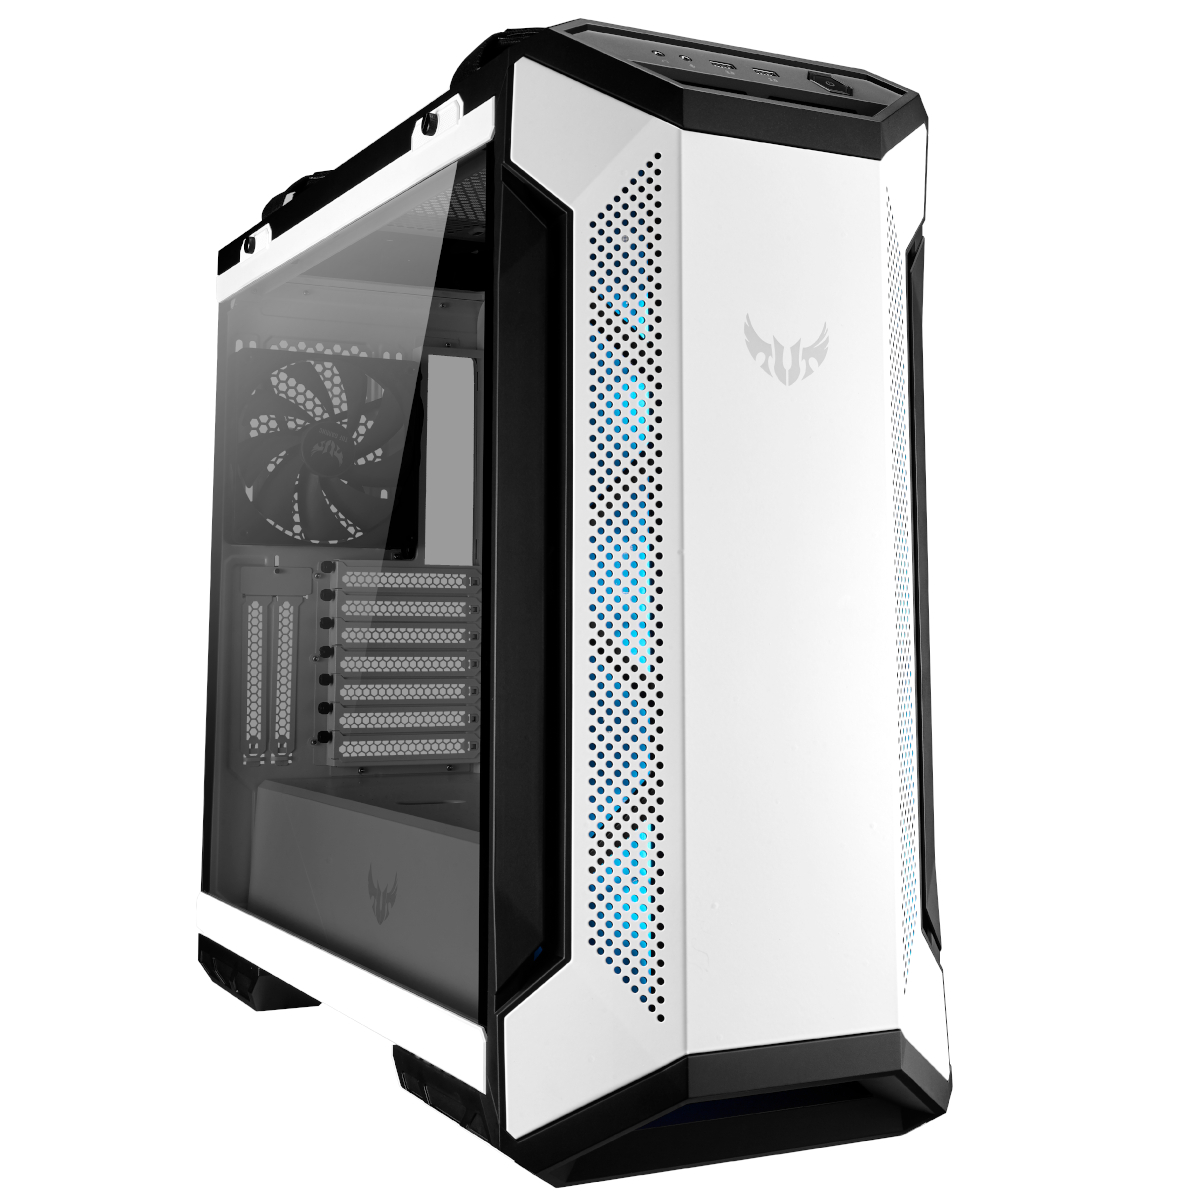 B Grade ASUS TUF Gaming GT501 Midi-Tower Case - White Tempered Glass